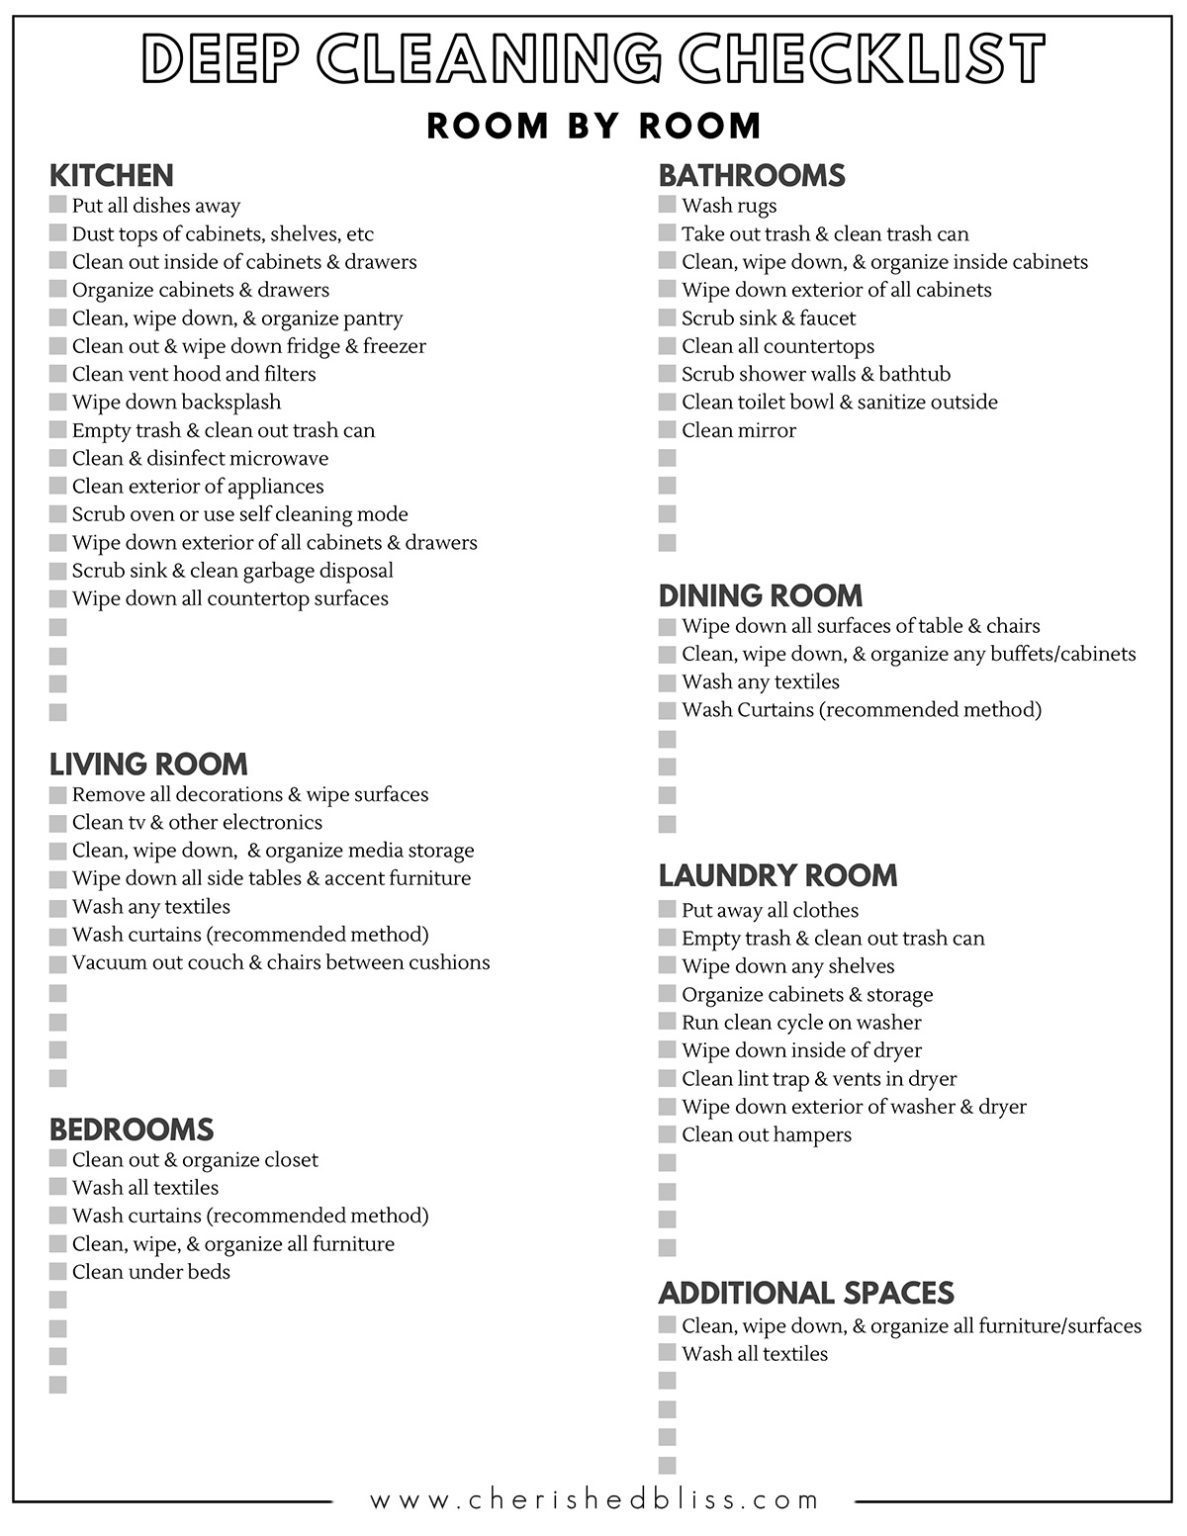 How to Clean Your House Effectively | Free Printable - Cherished Bliss